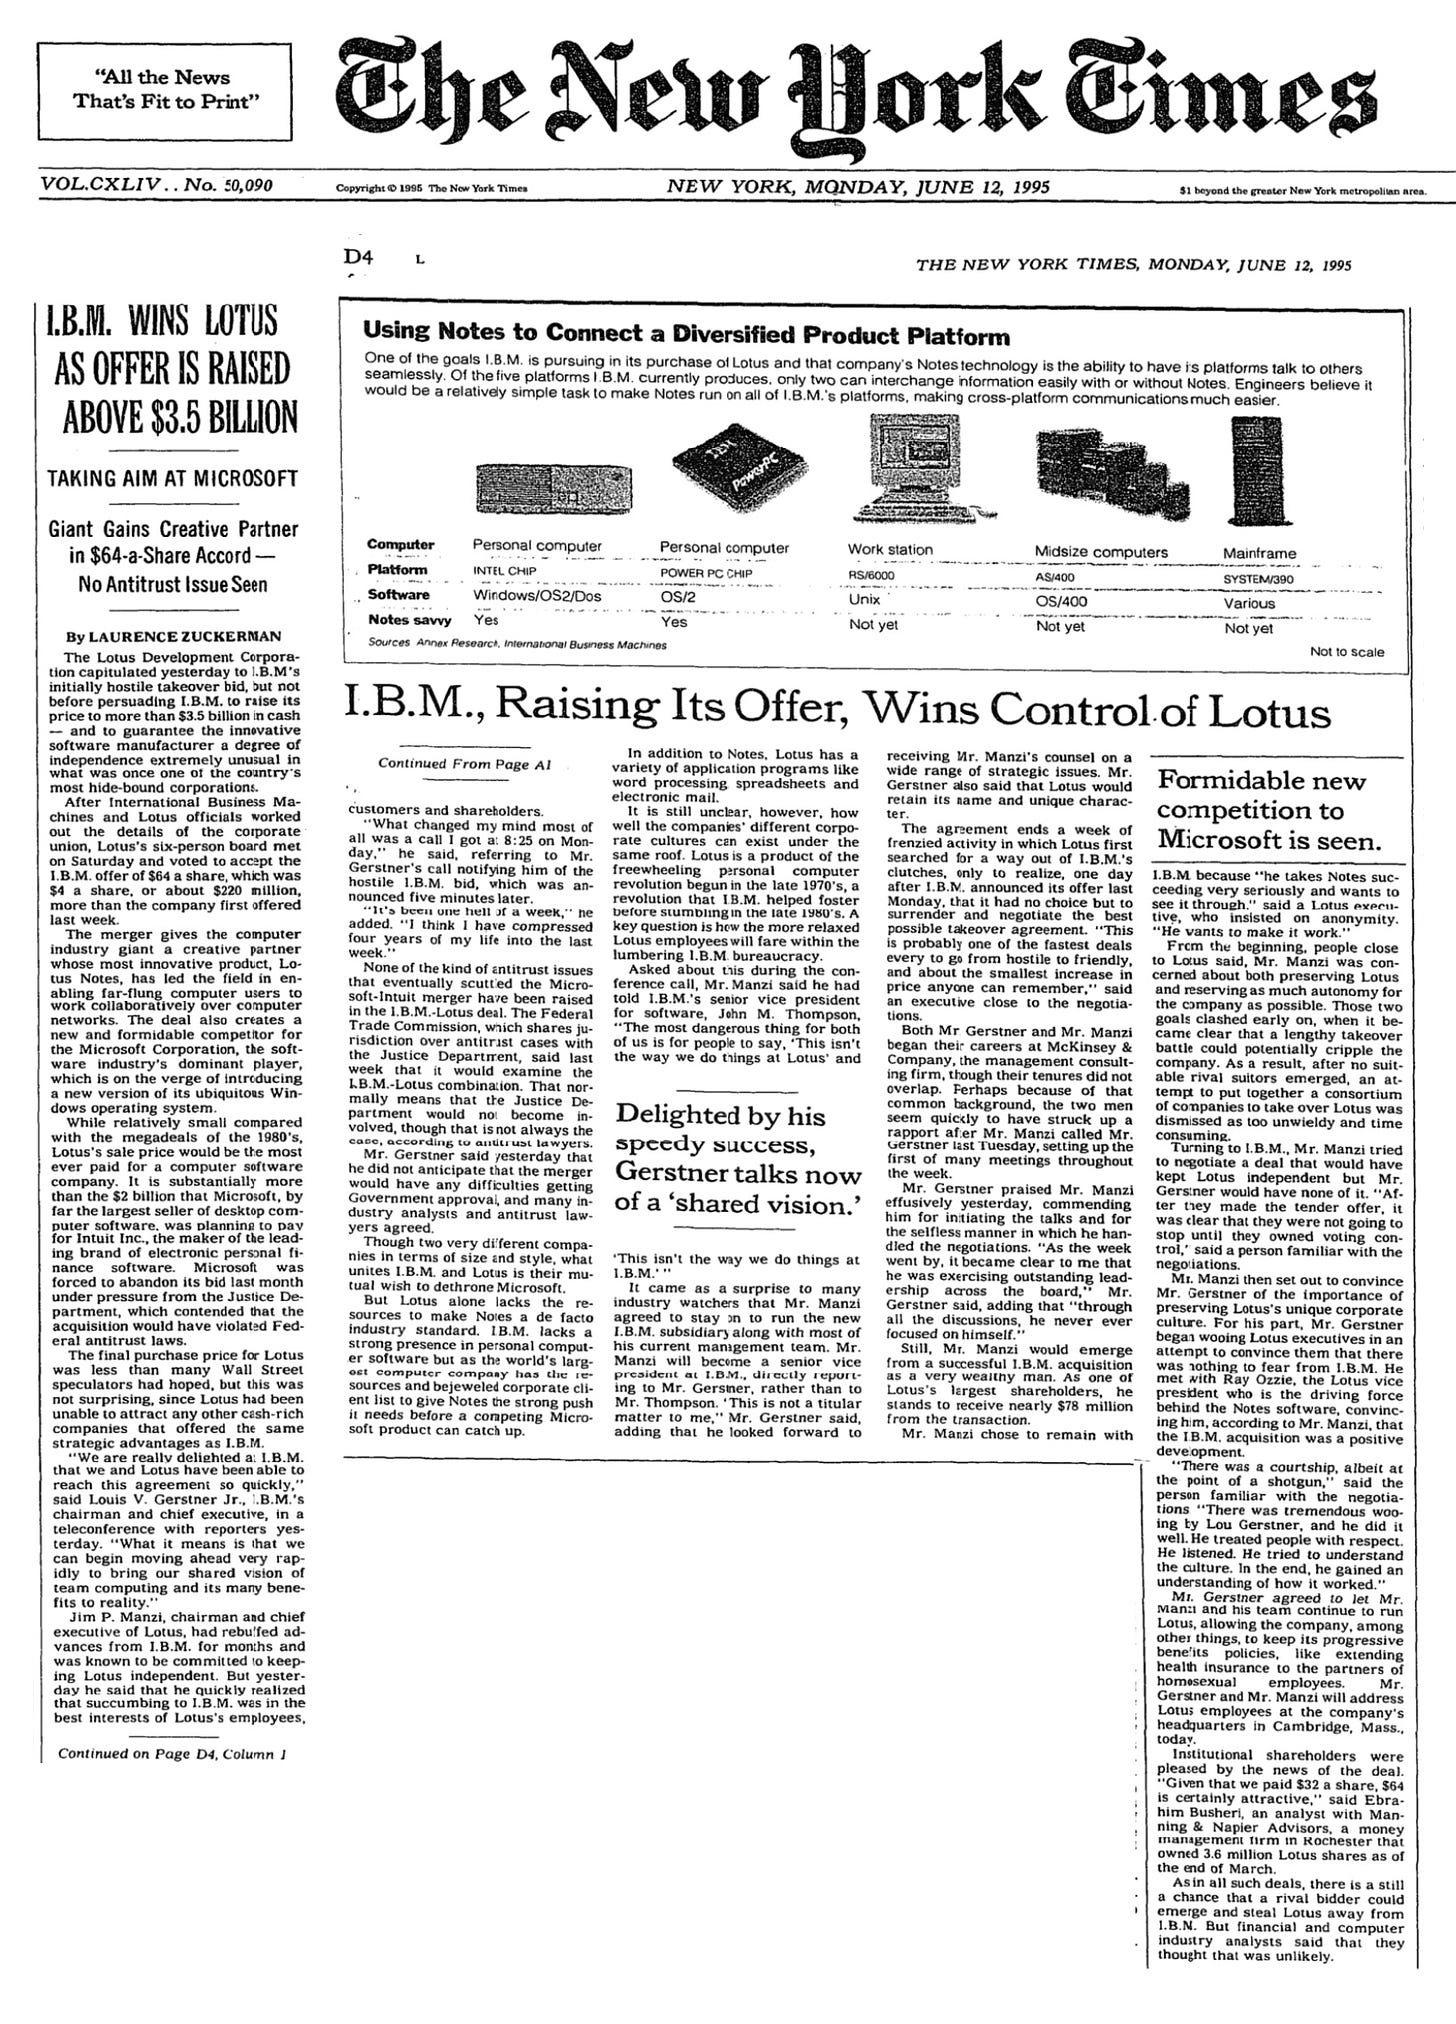 Extensive front page coverage from the NY Times on IBM acquiring Lotus Notes